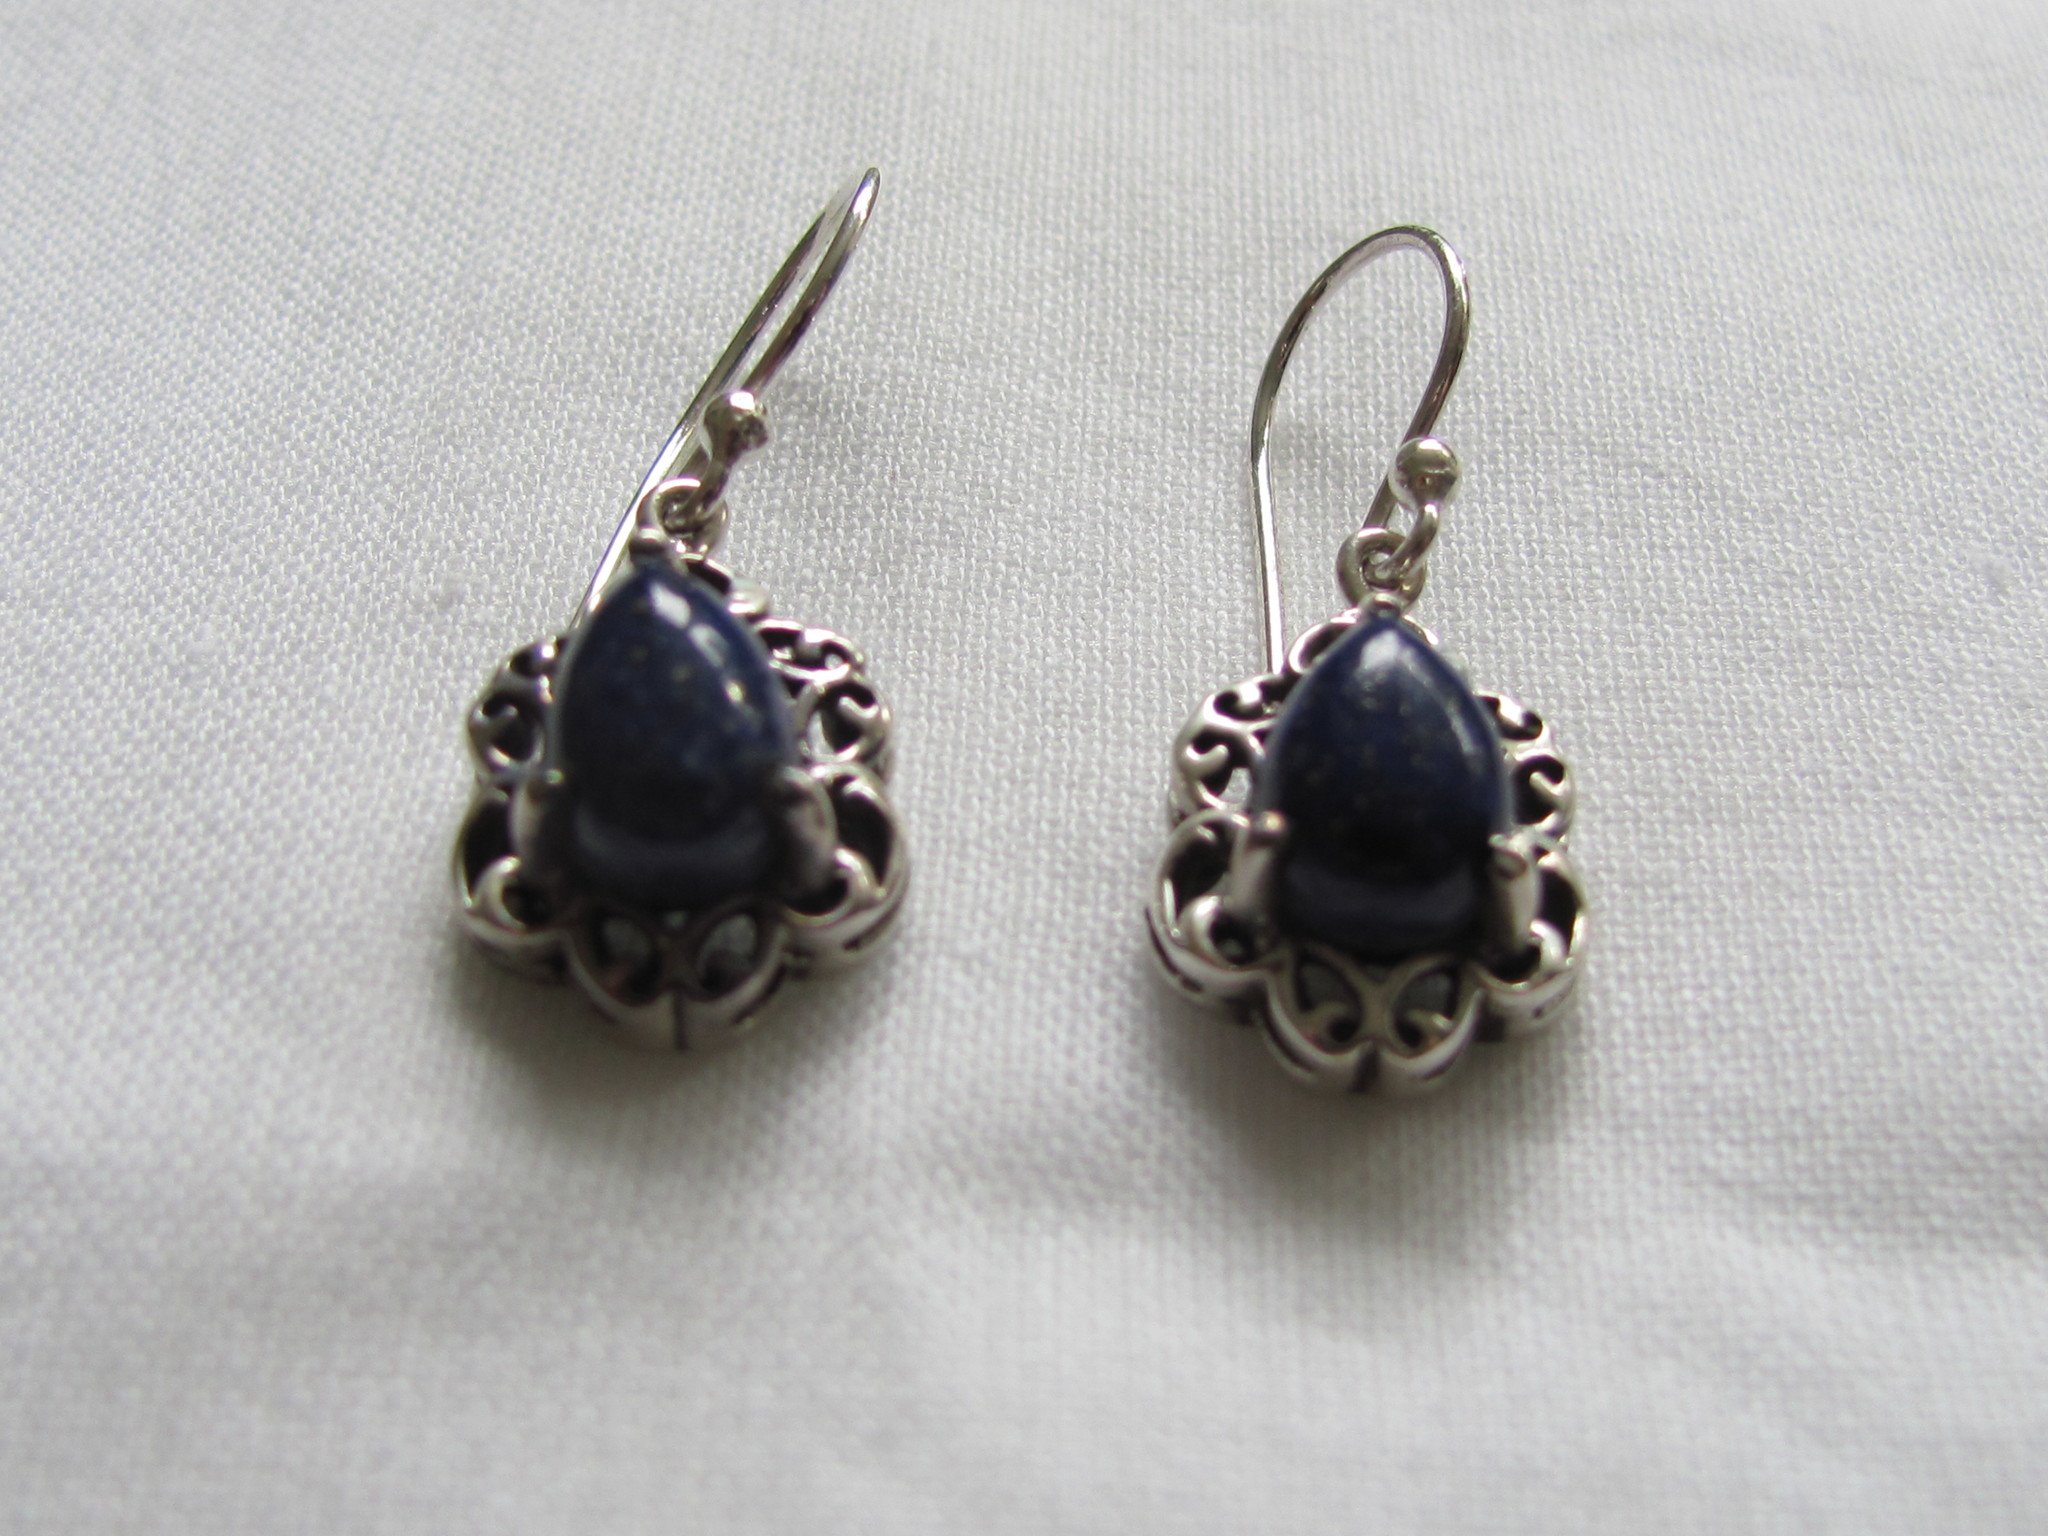 Earring silver  with  lapis lazuli stone